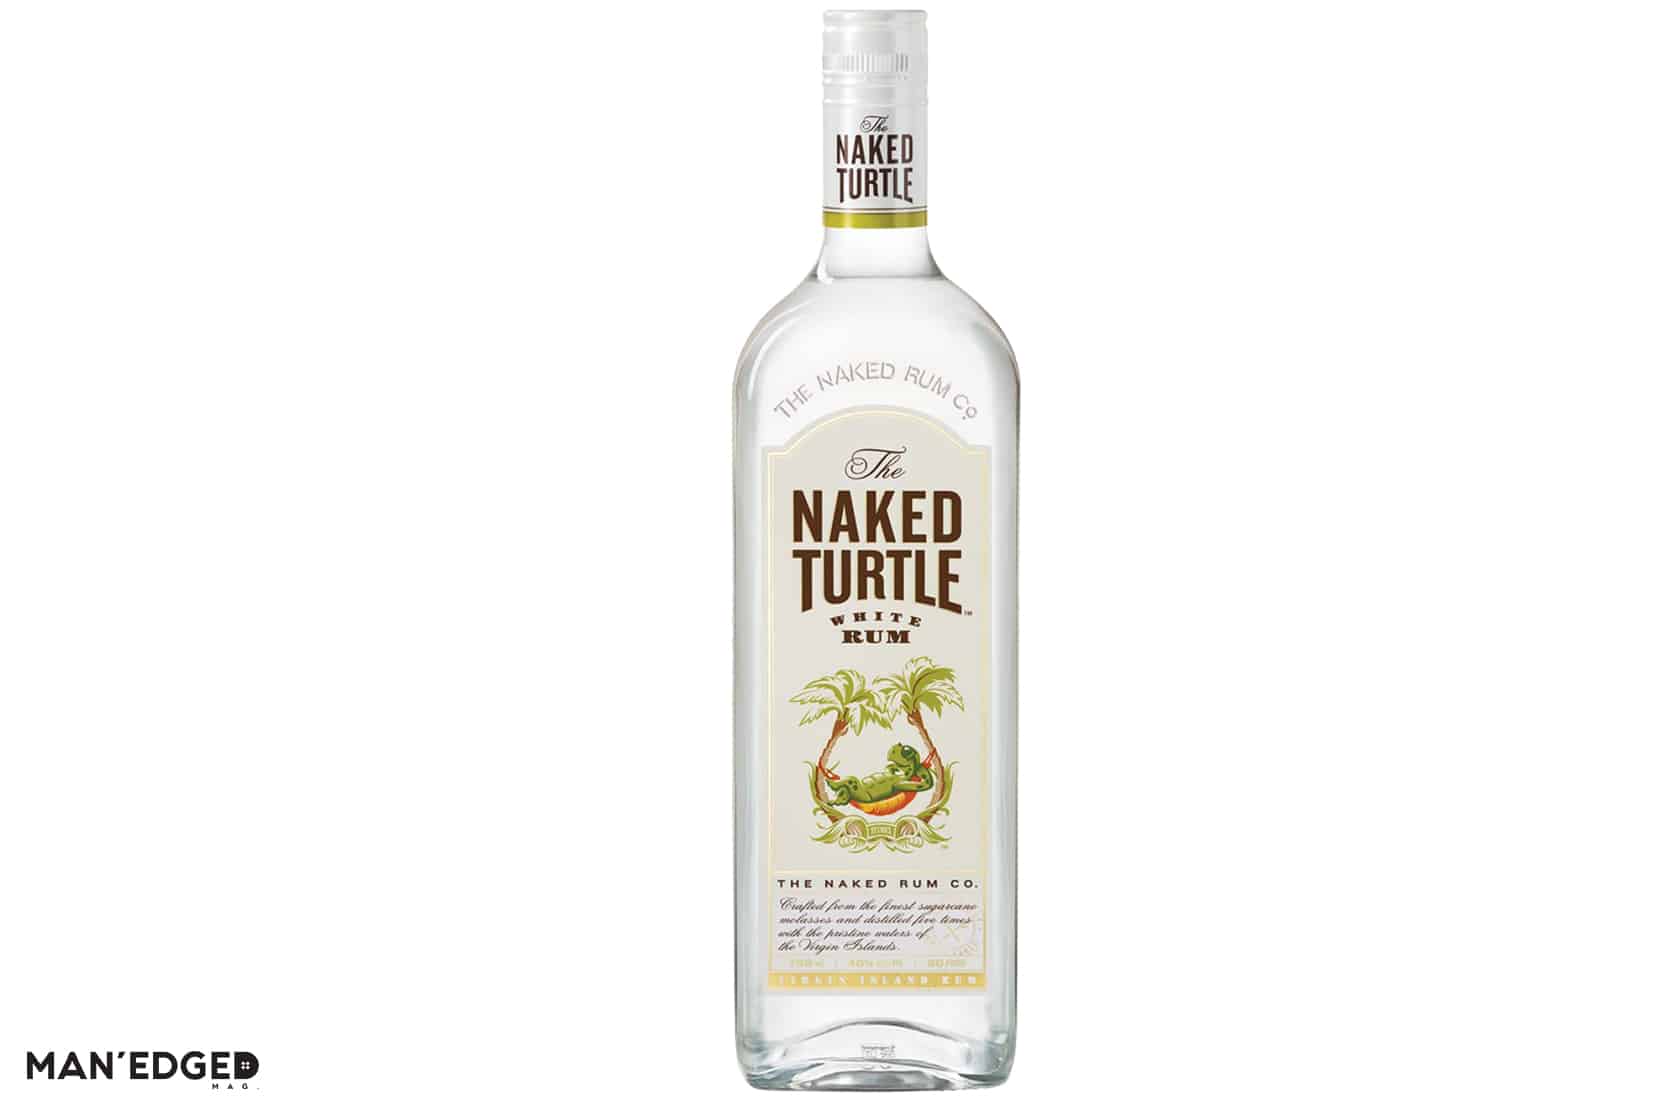 Gift ideas for the Health Expert Guy featuring Naked Turtle Rum